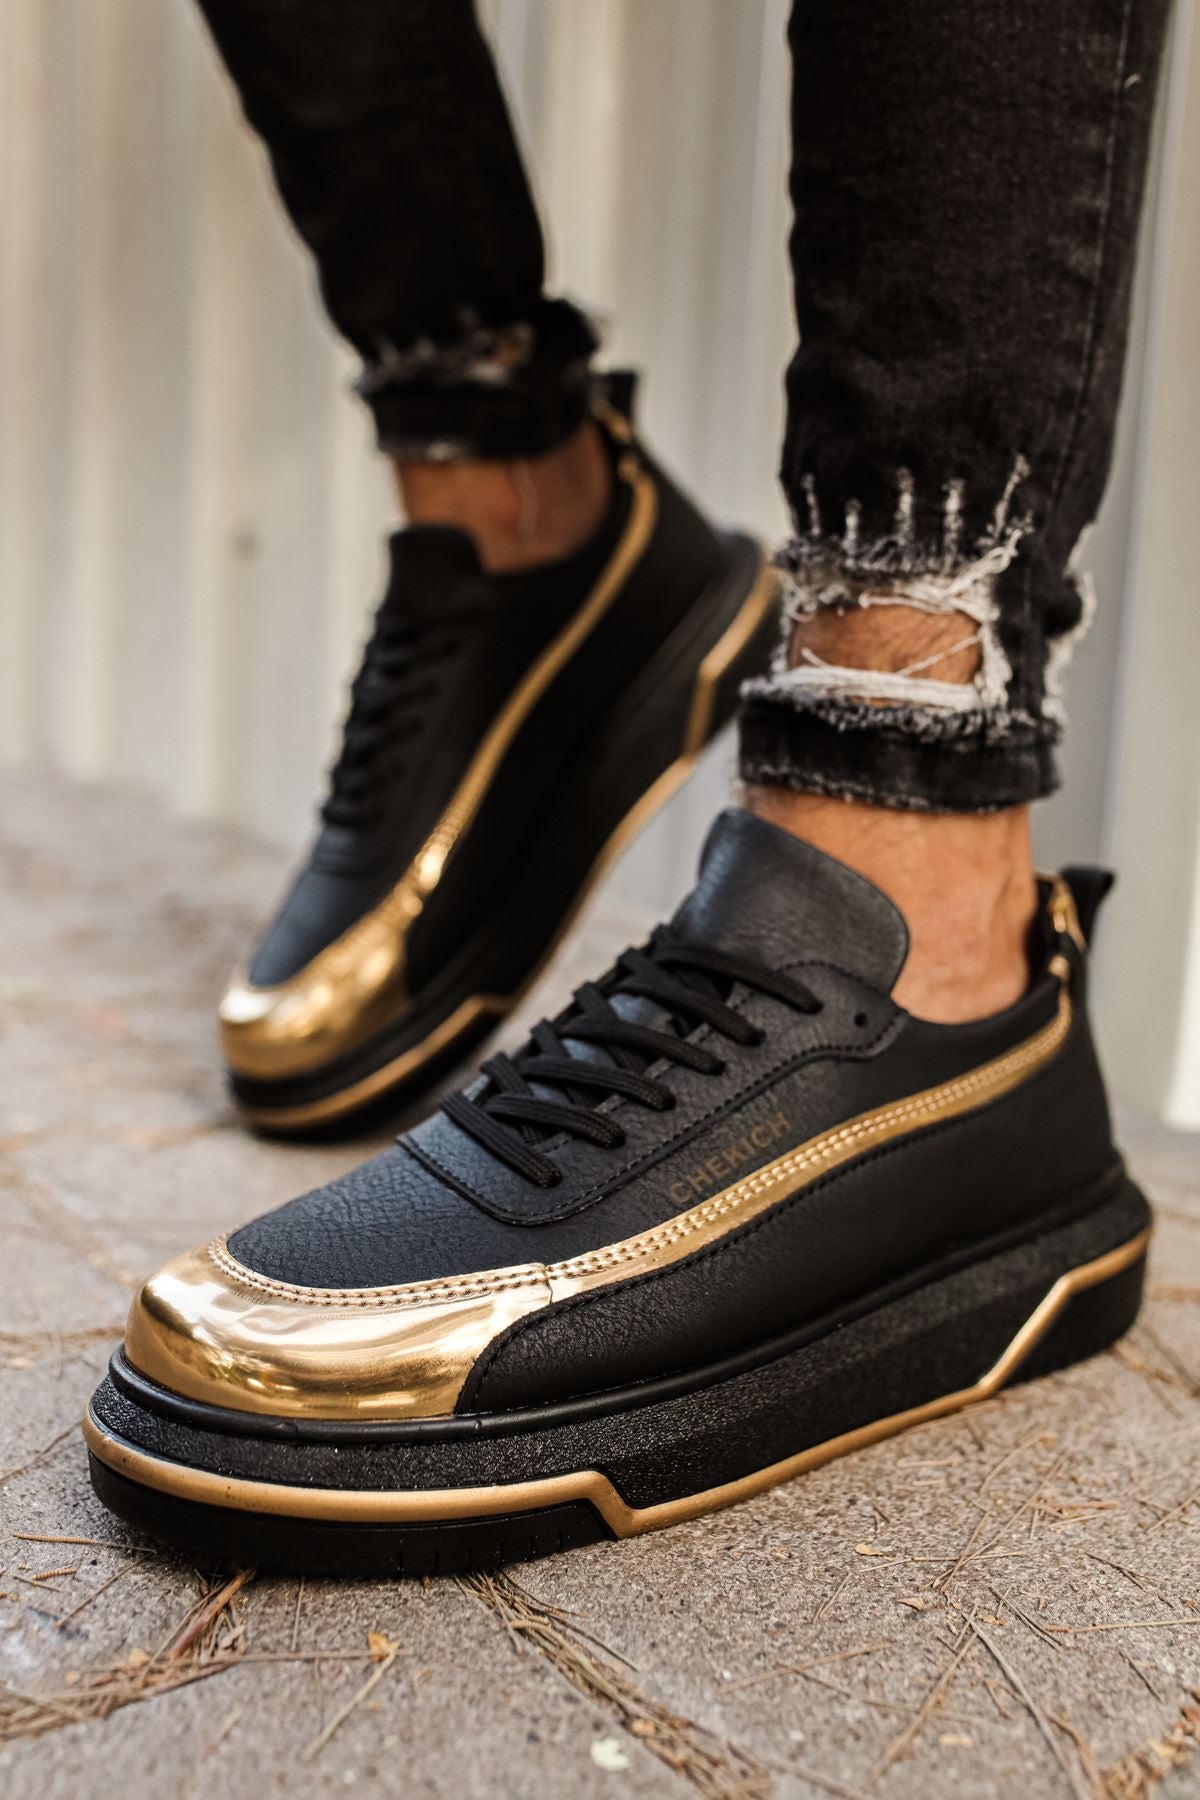 CH041 ST Men's Sneaker Shoes BLACK / GOLD - STREETMODE ™